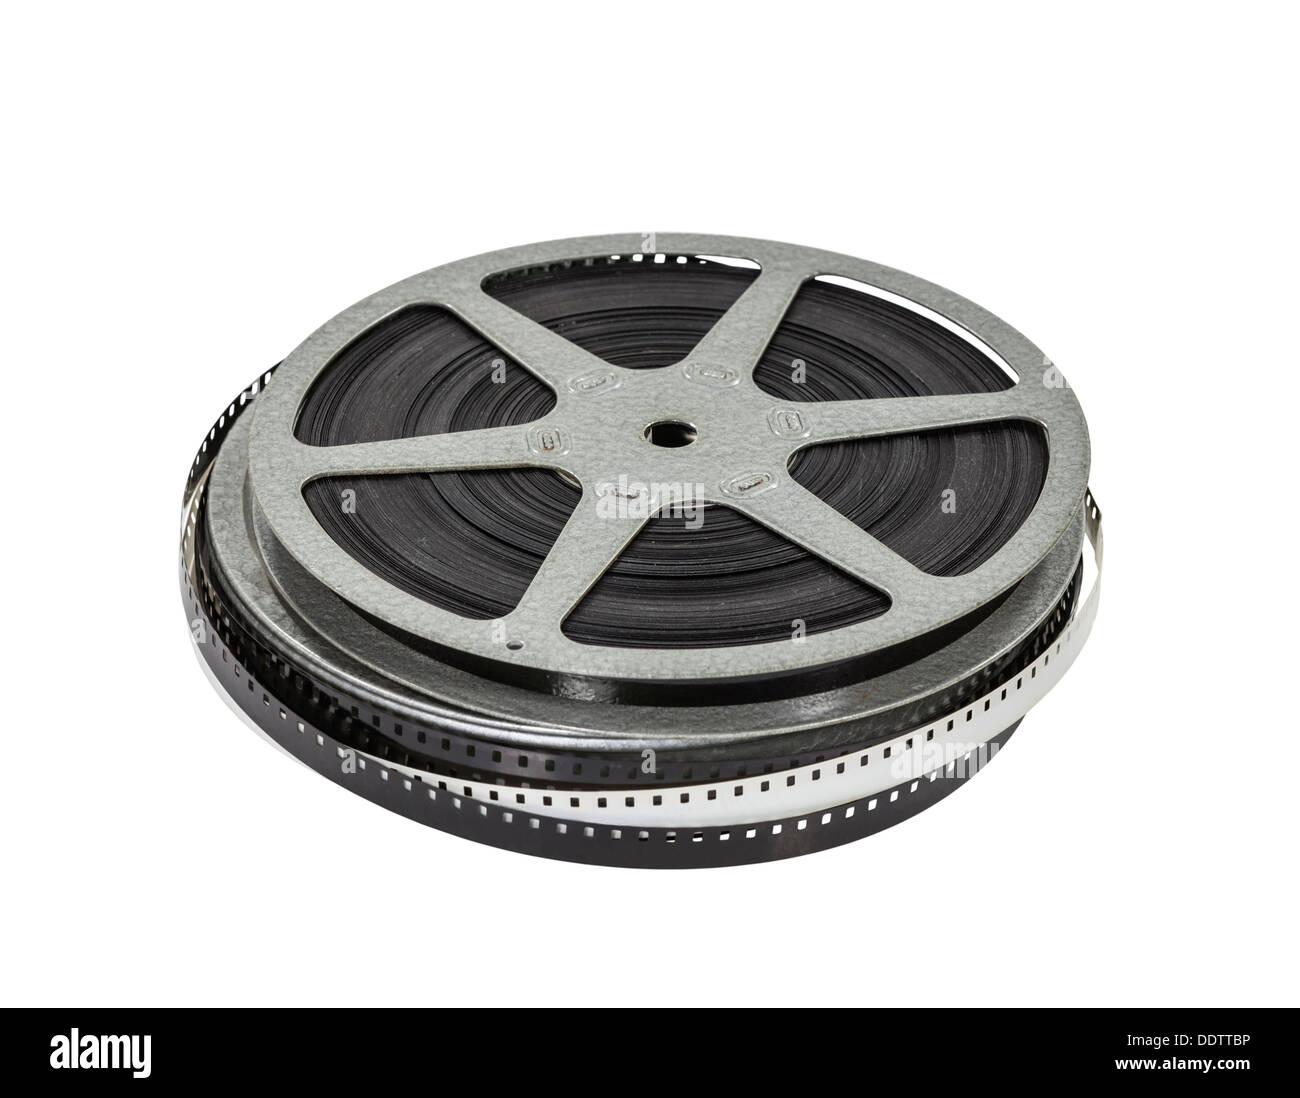 Movie Trailers in Metal Film Cans Stock Image - Image of curly